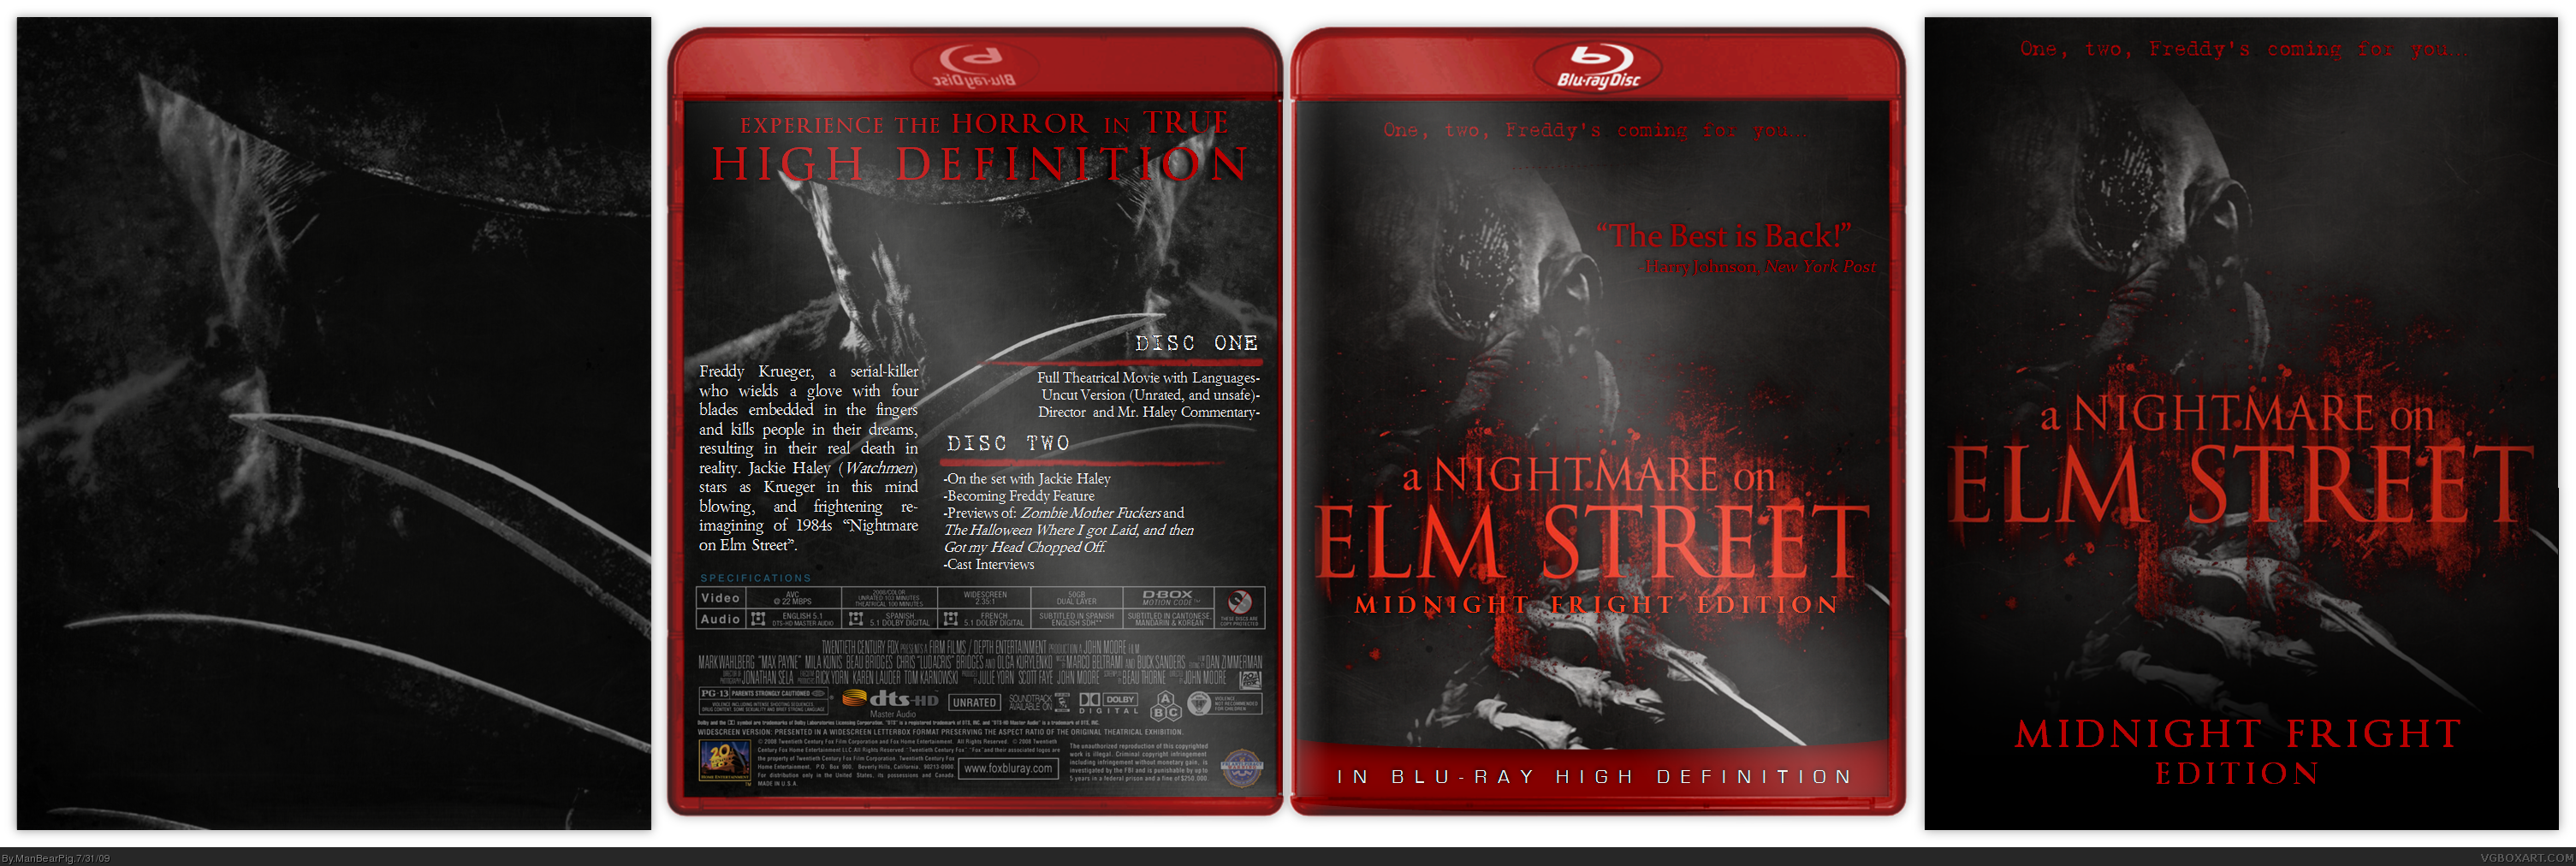 A Nightmare on Elm Street: Midnight Fright Edition box cover